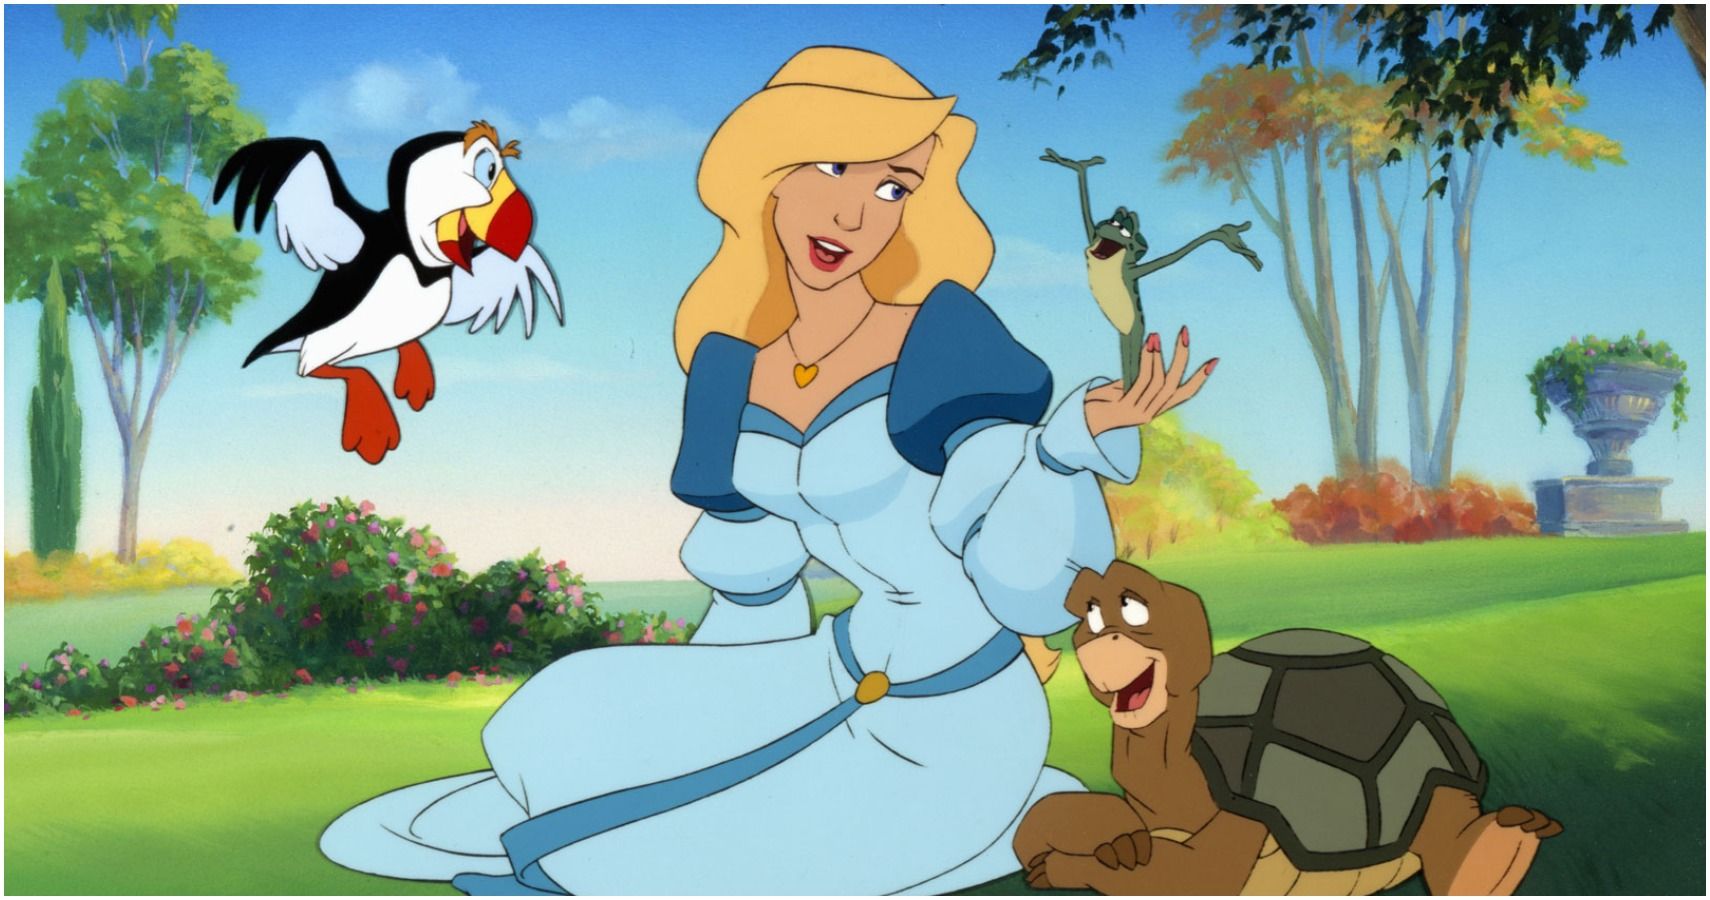 10 Cancelled Disney Princesses We’ll Never See Movies About